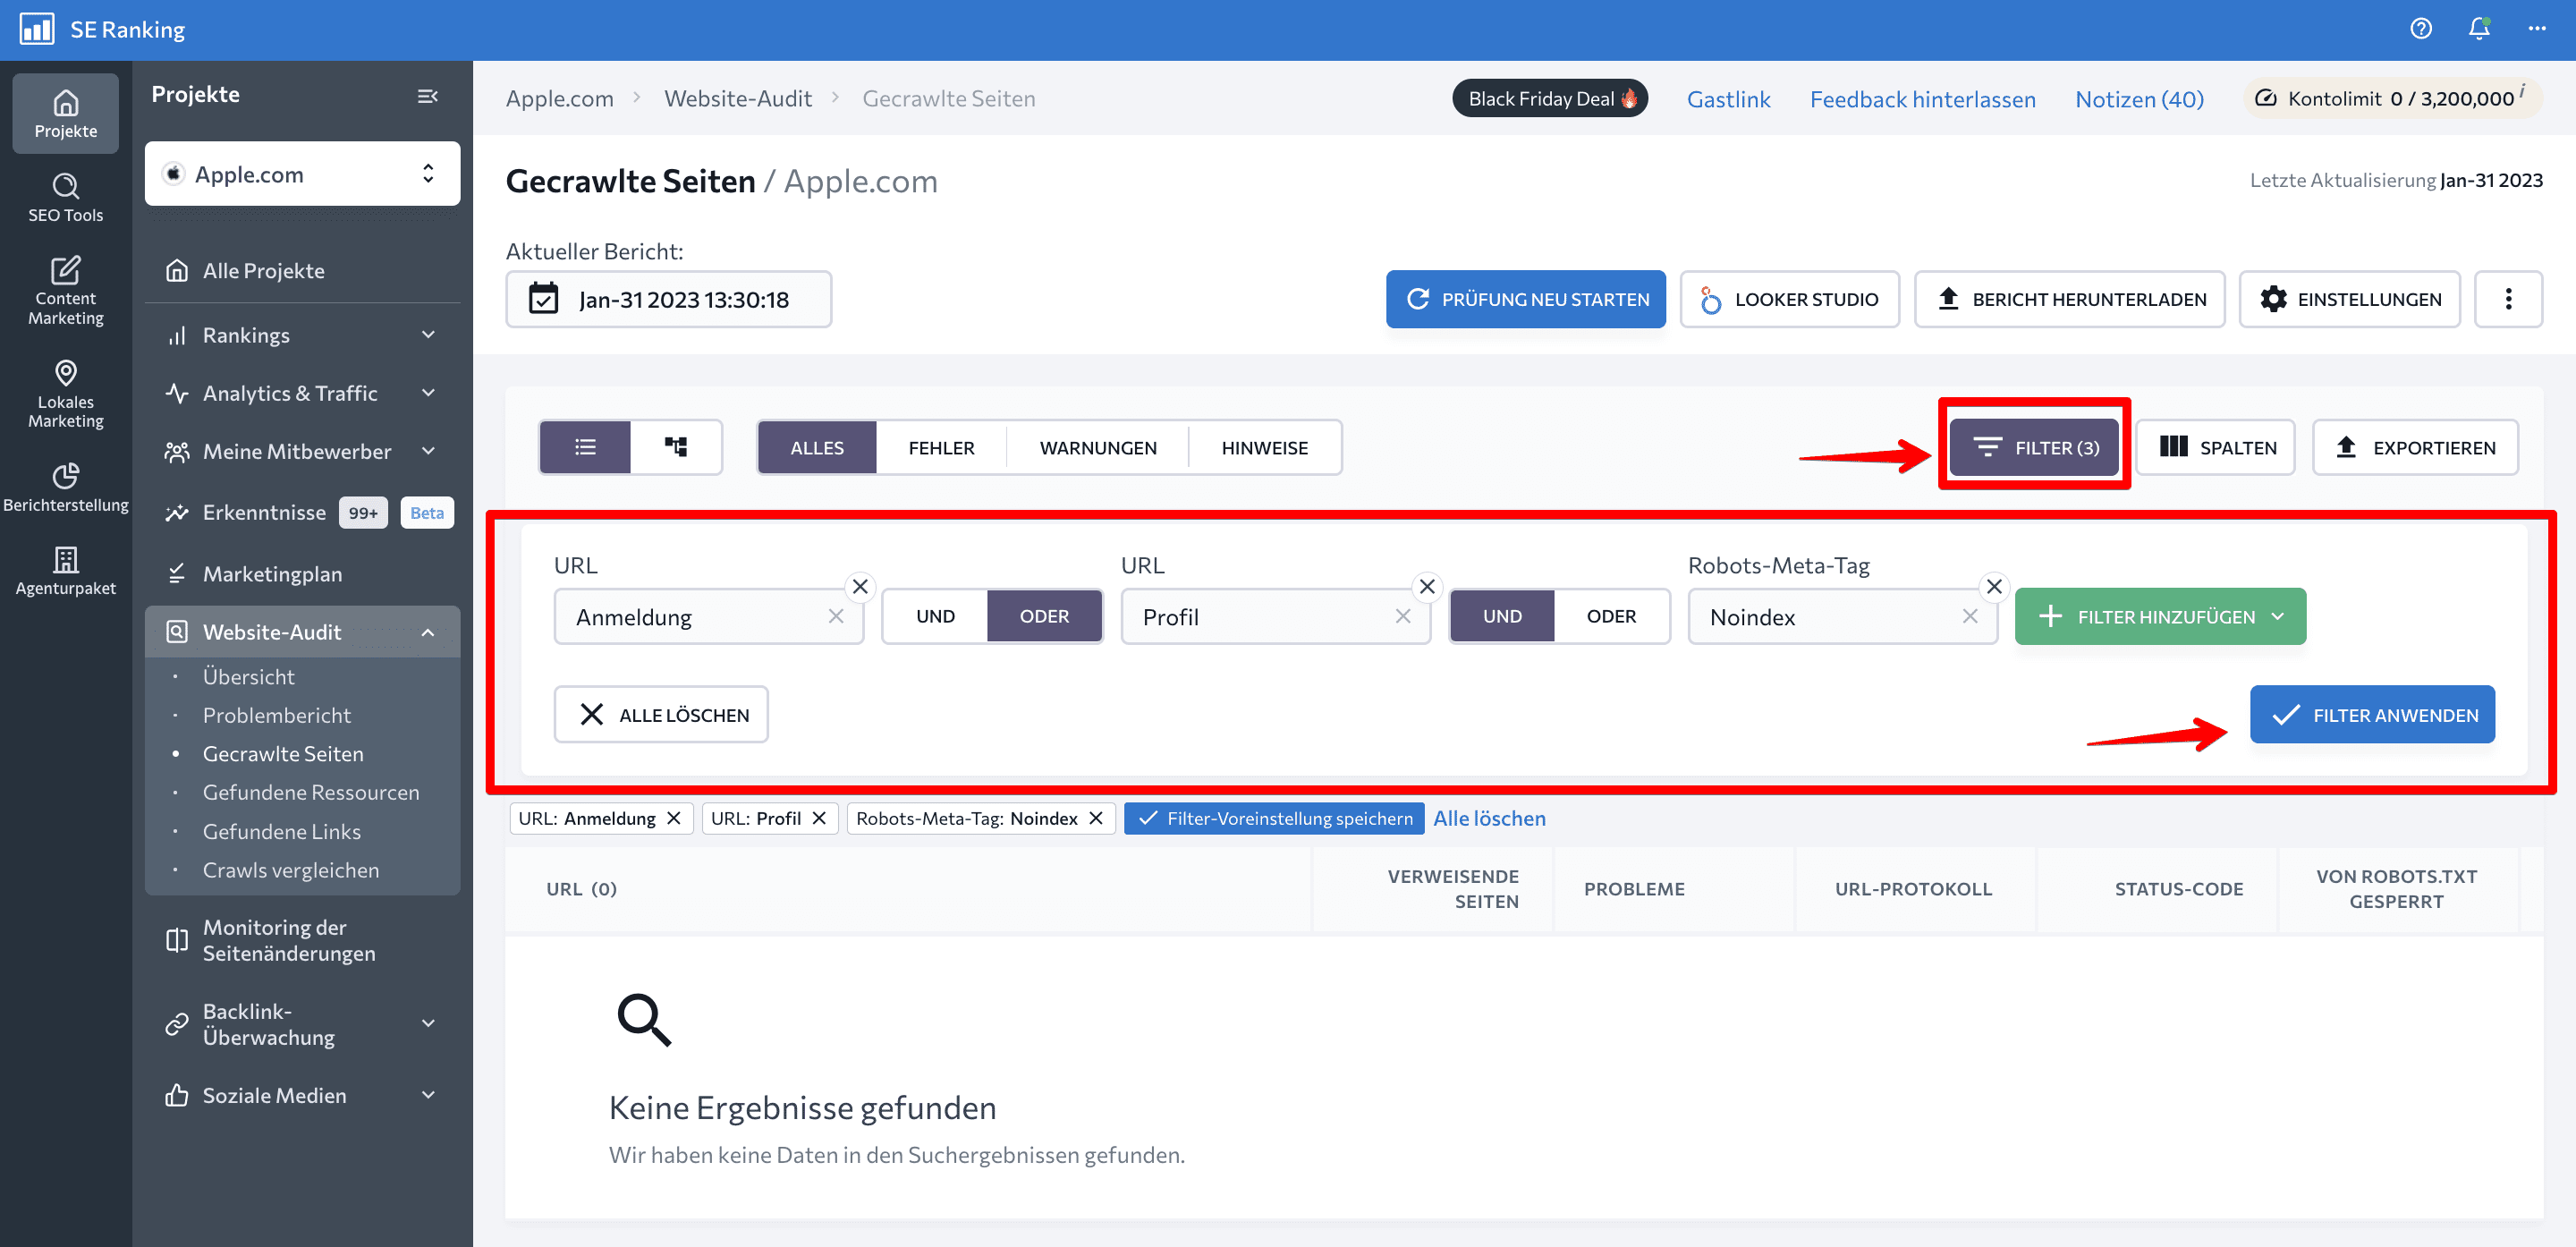 Filters for private pages